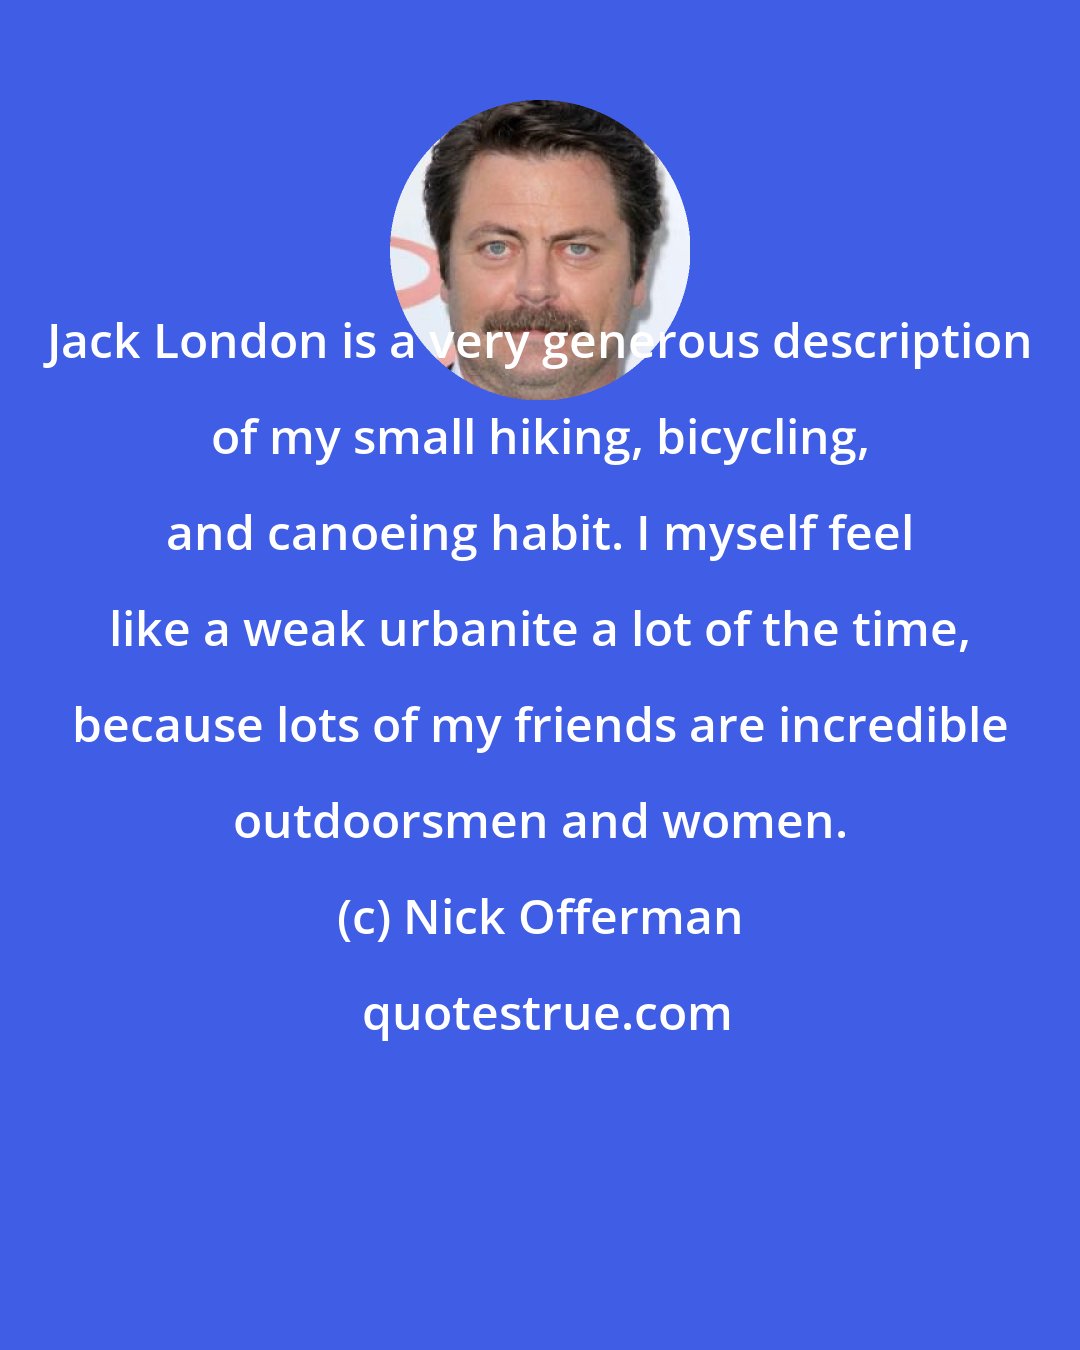 Nick Offerman: Jack London is a very generous description of my small hiking, bicycling, and canoeing habit. I myself feel like a weak urbanite a lot of the time, because lots of my friends are incredible outdoorsmen and women.